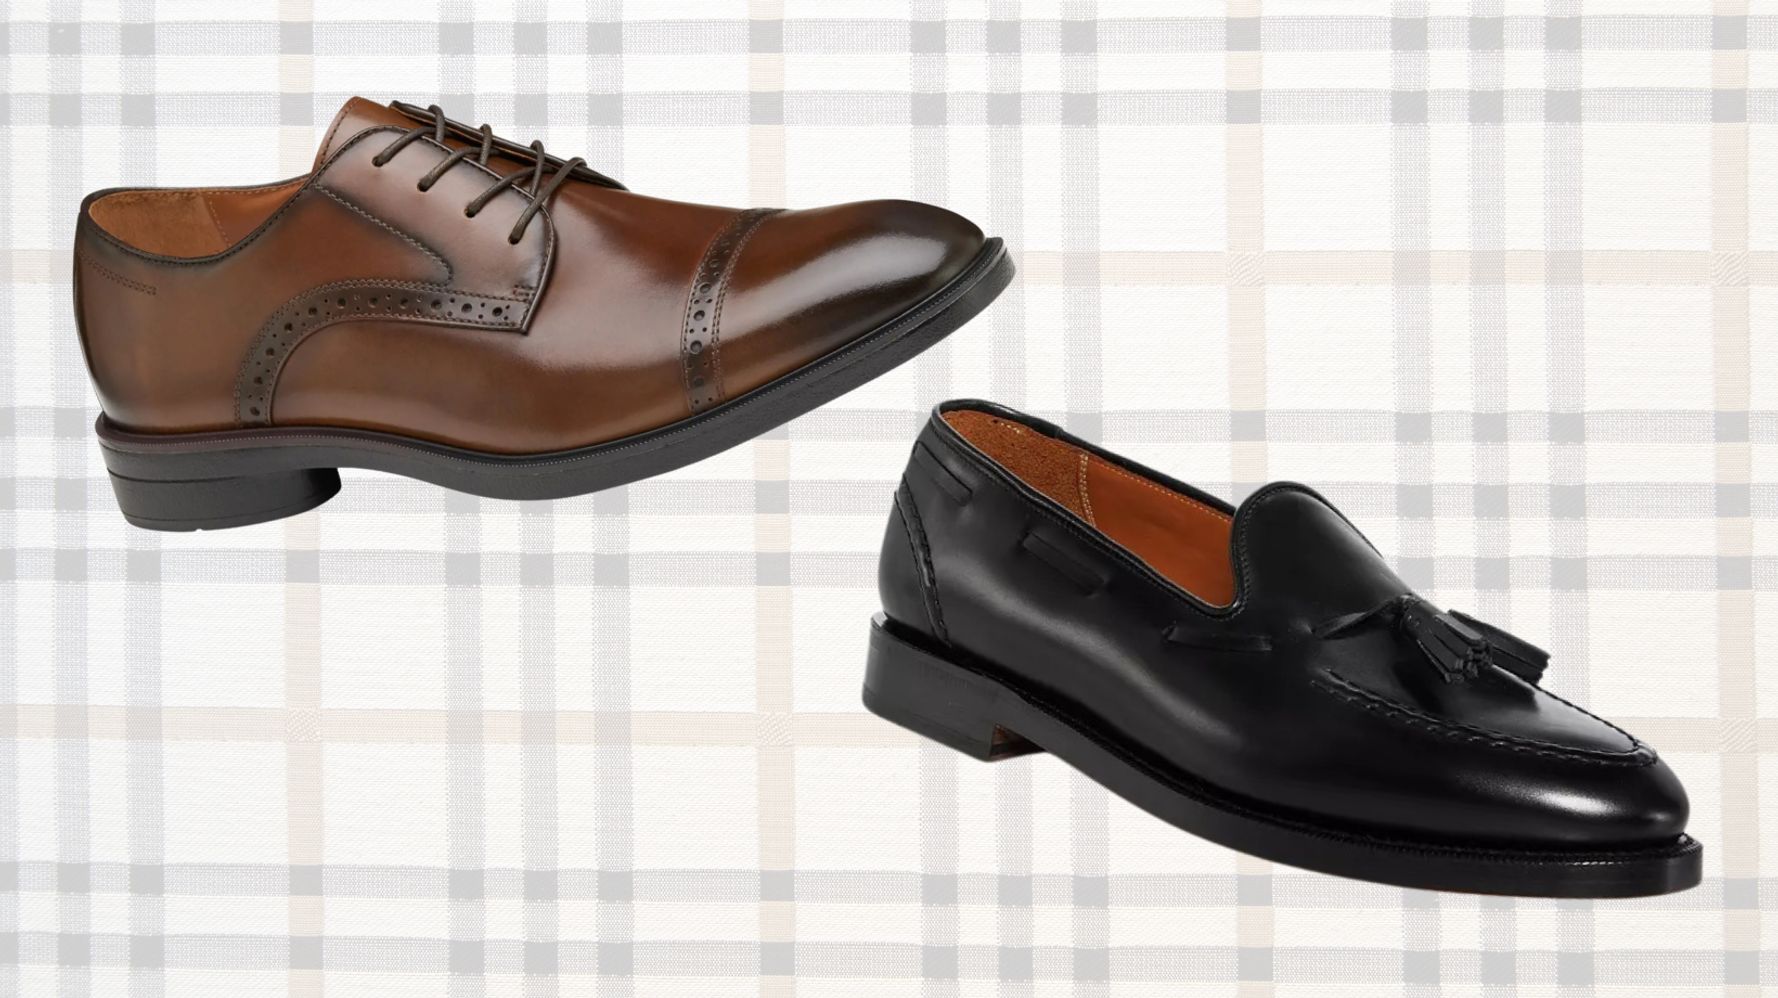 Best Dress Shoes 2021: Reviews of Top Oxfords, Boots, Loafers for Men